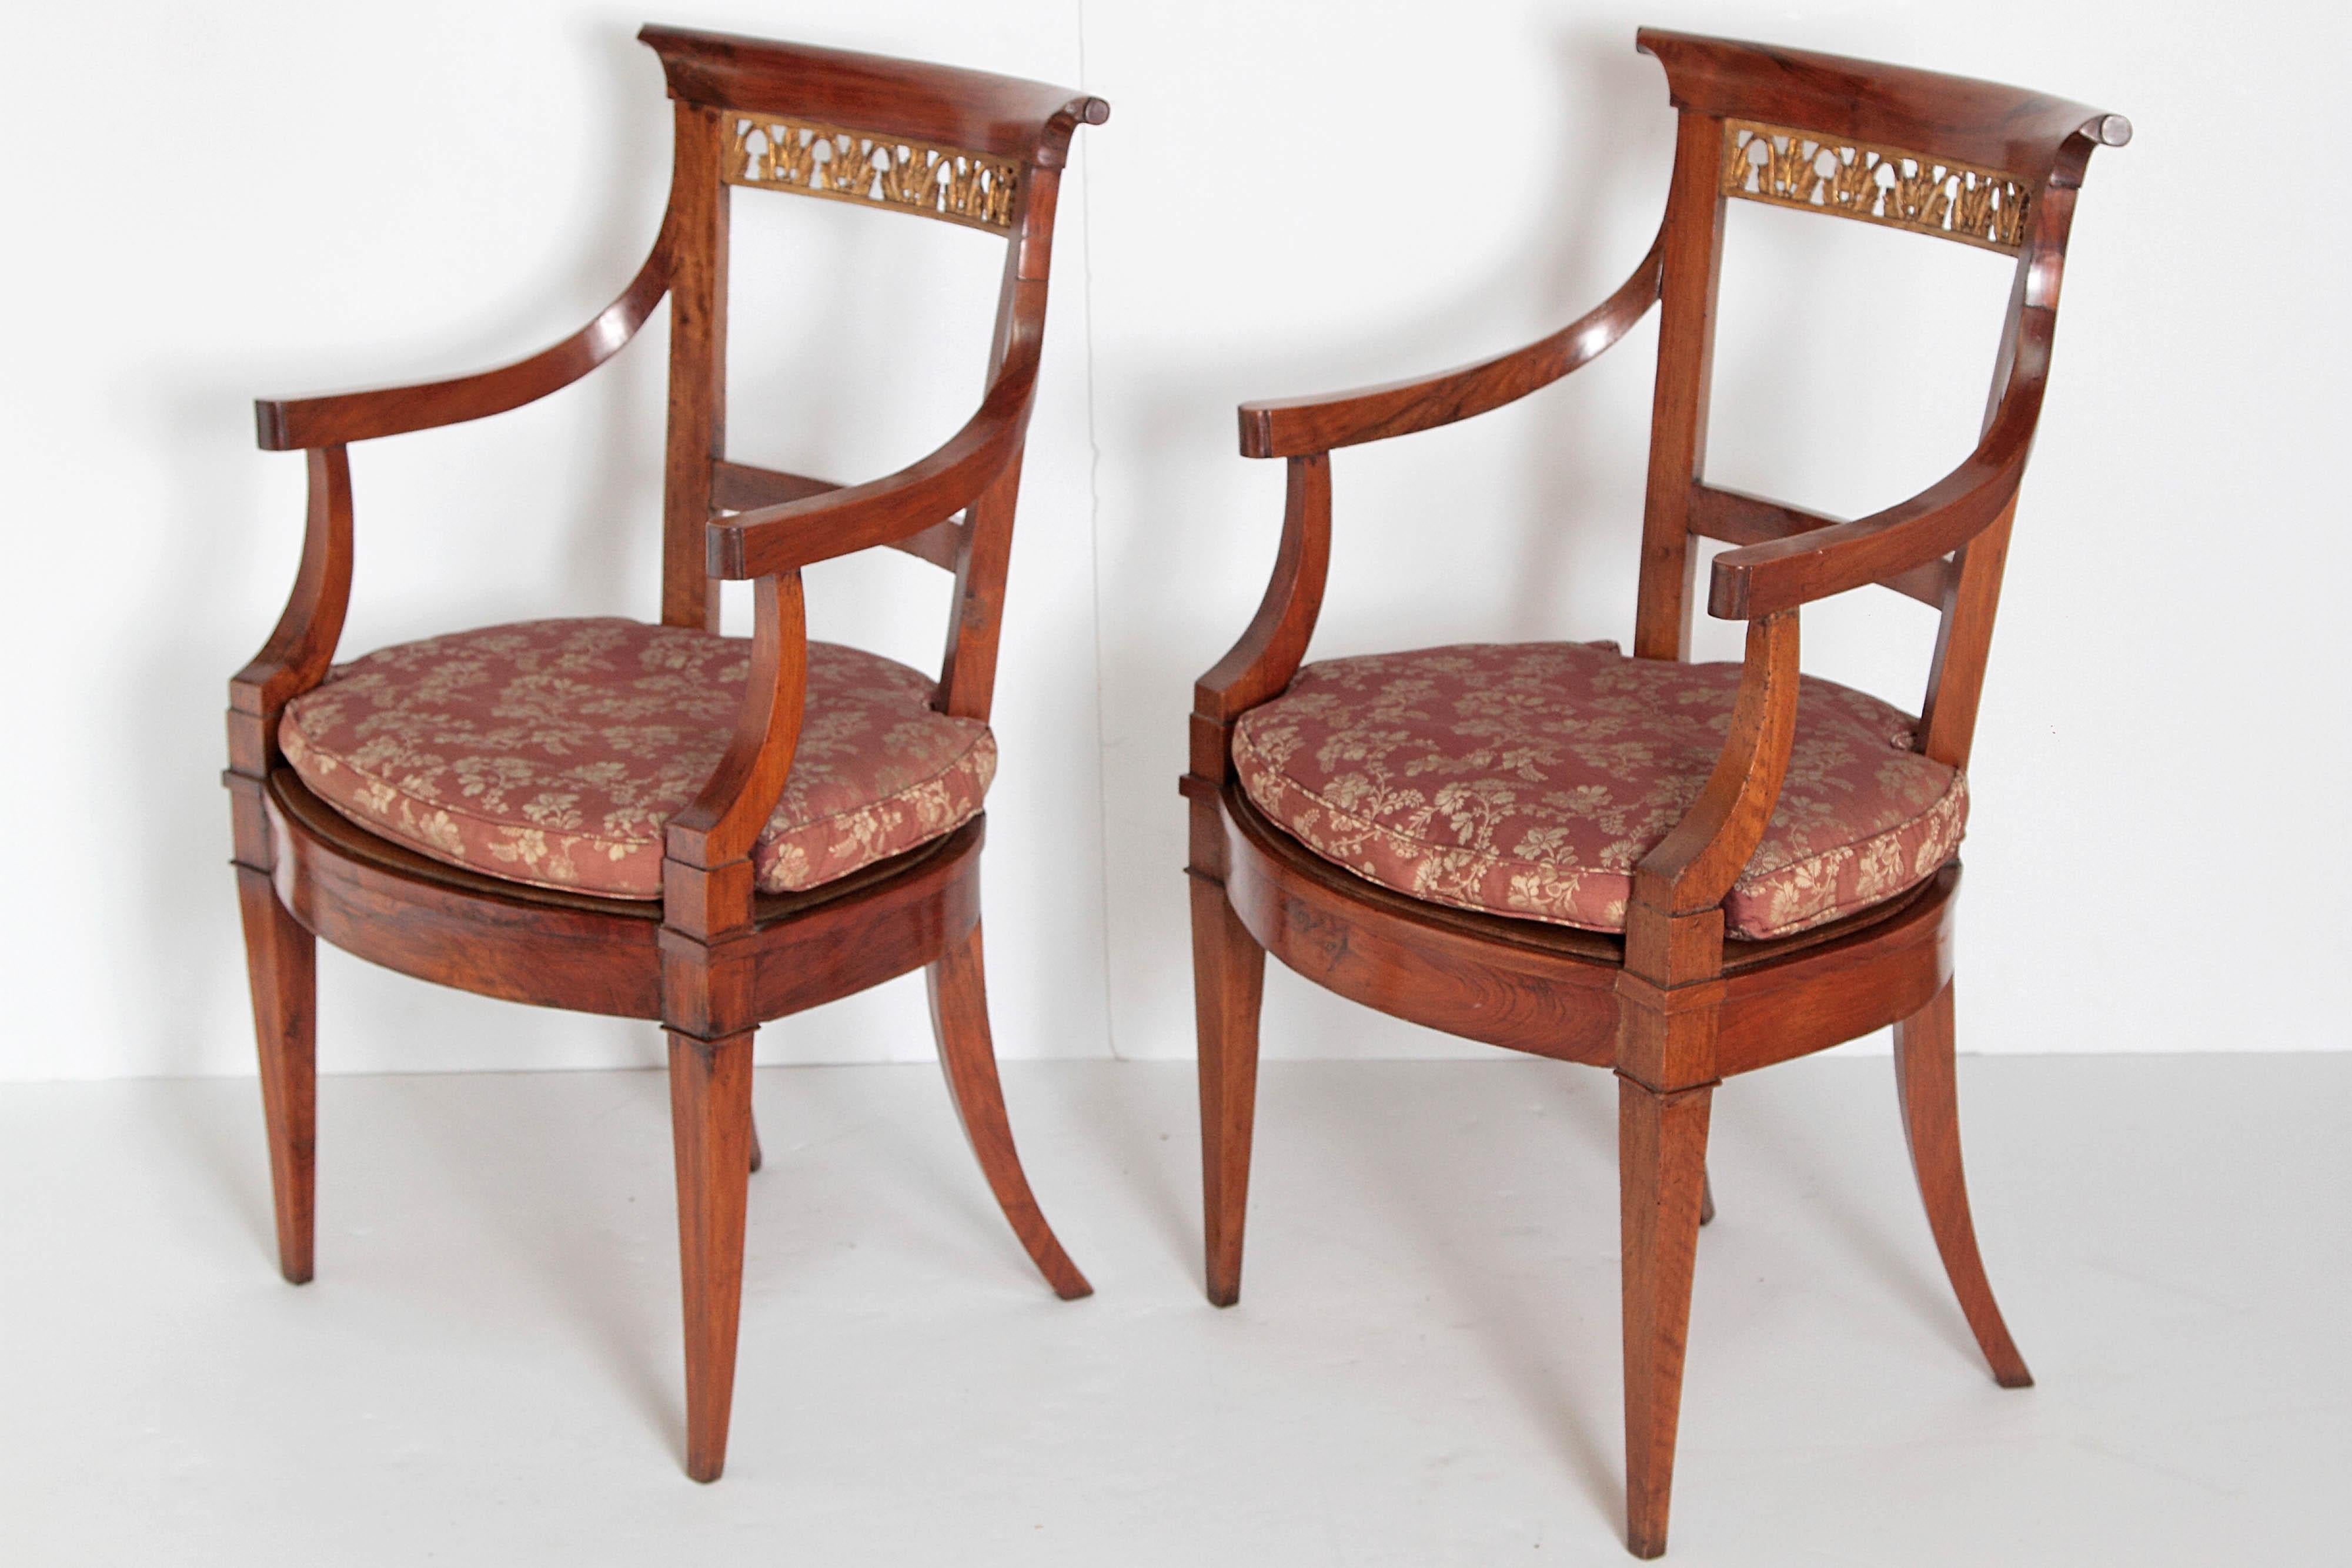 Hand-Carved Pair of Italian Neoclassical Armchairs